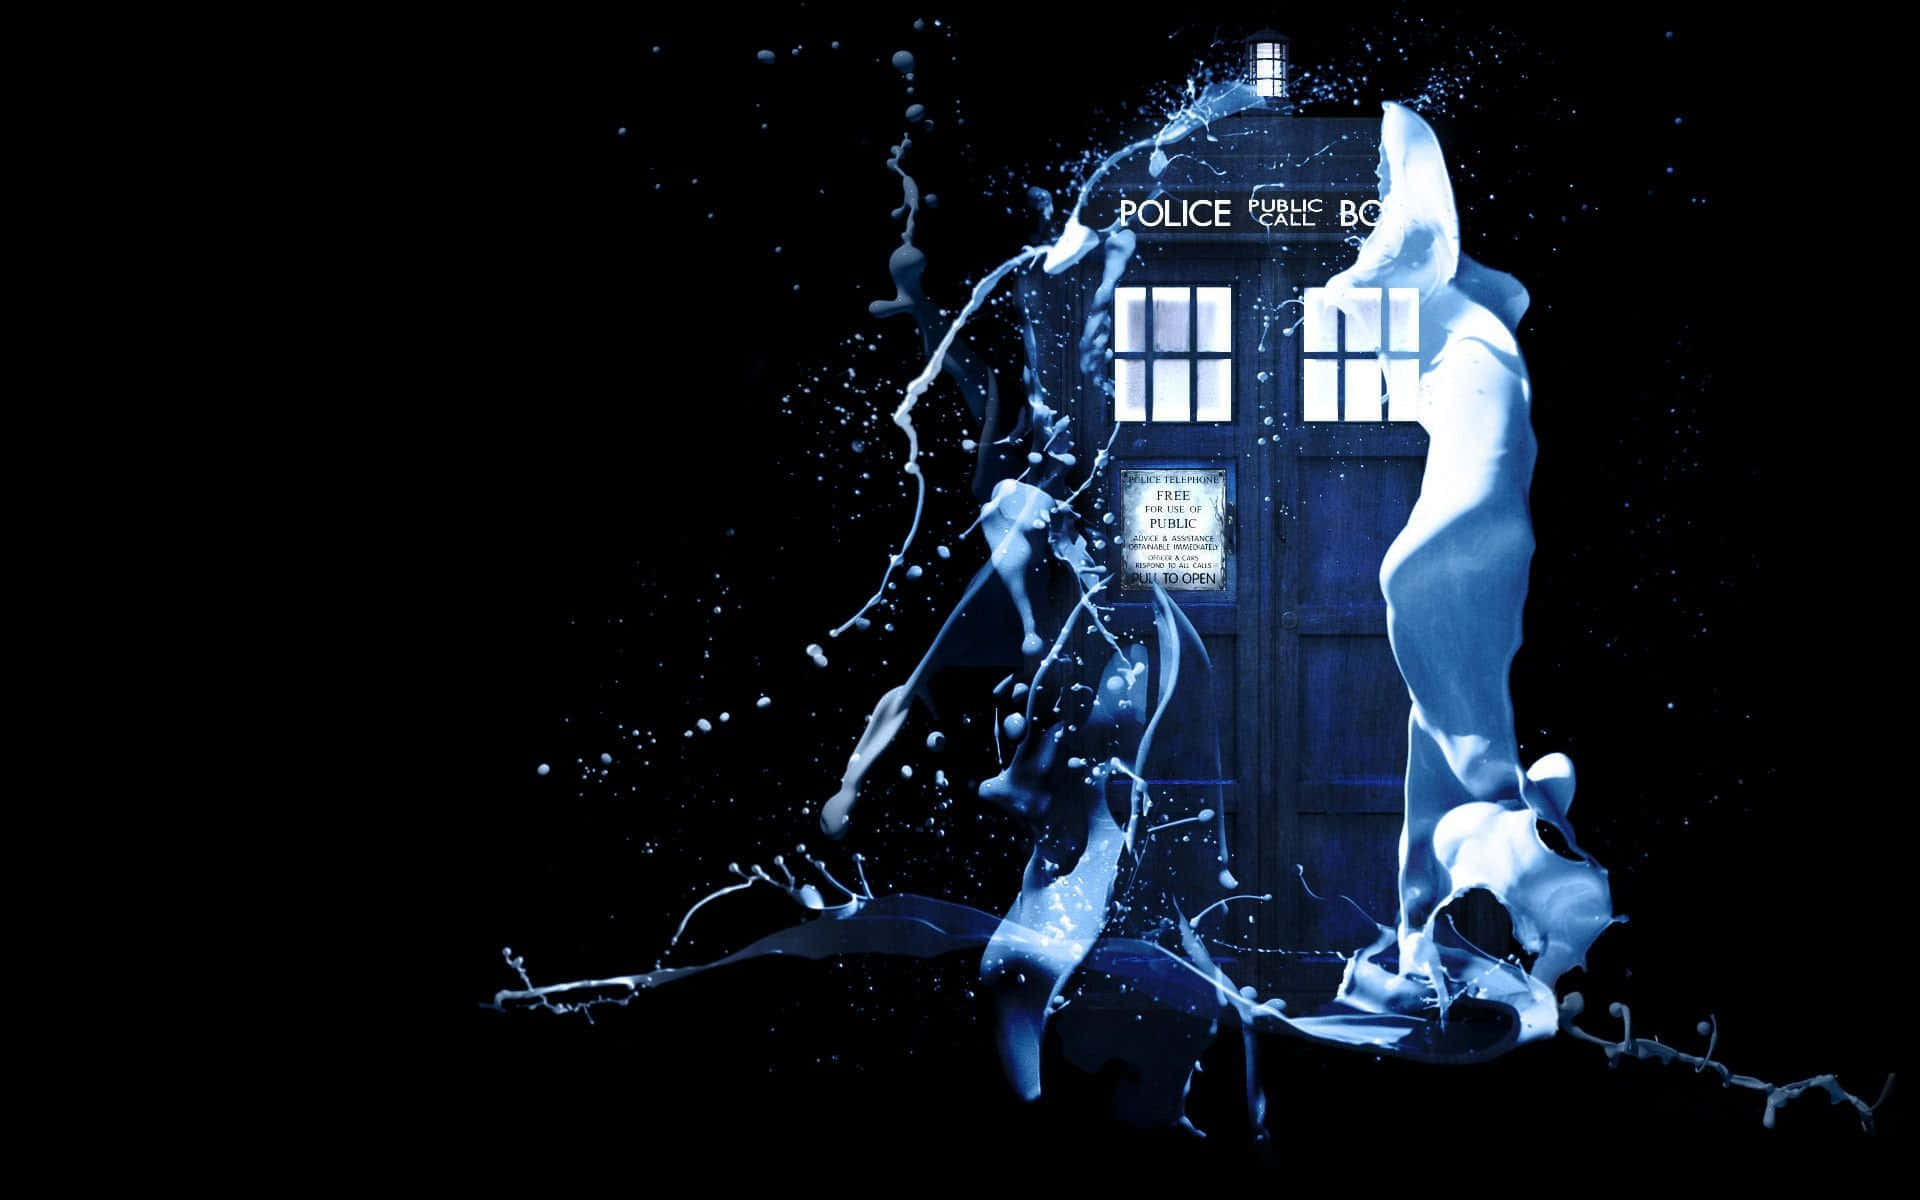 "Be prepared to explore time and space in the unique time machine, the Tardis" Wallpaper